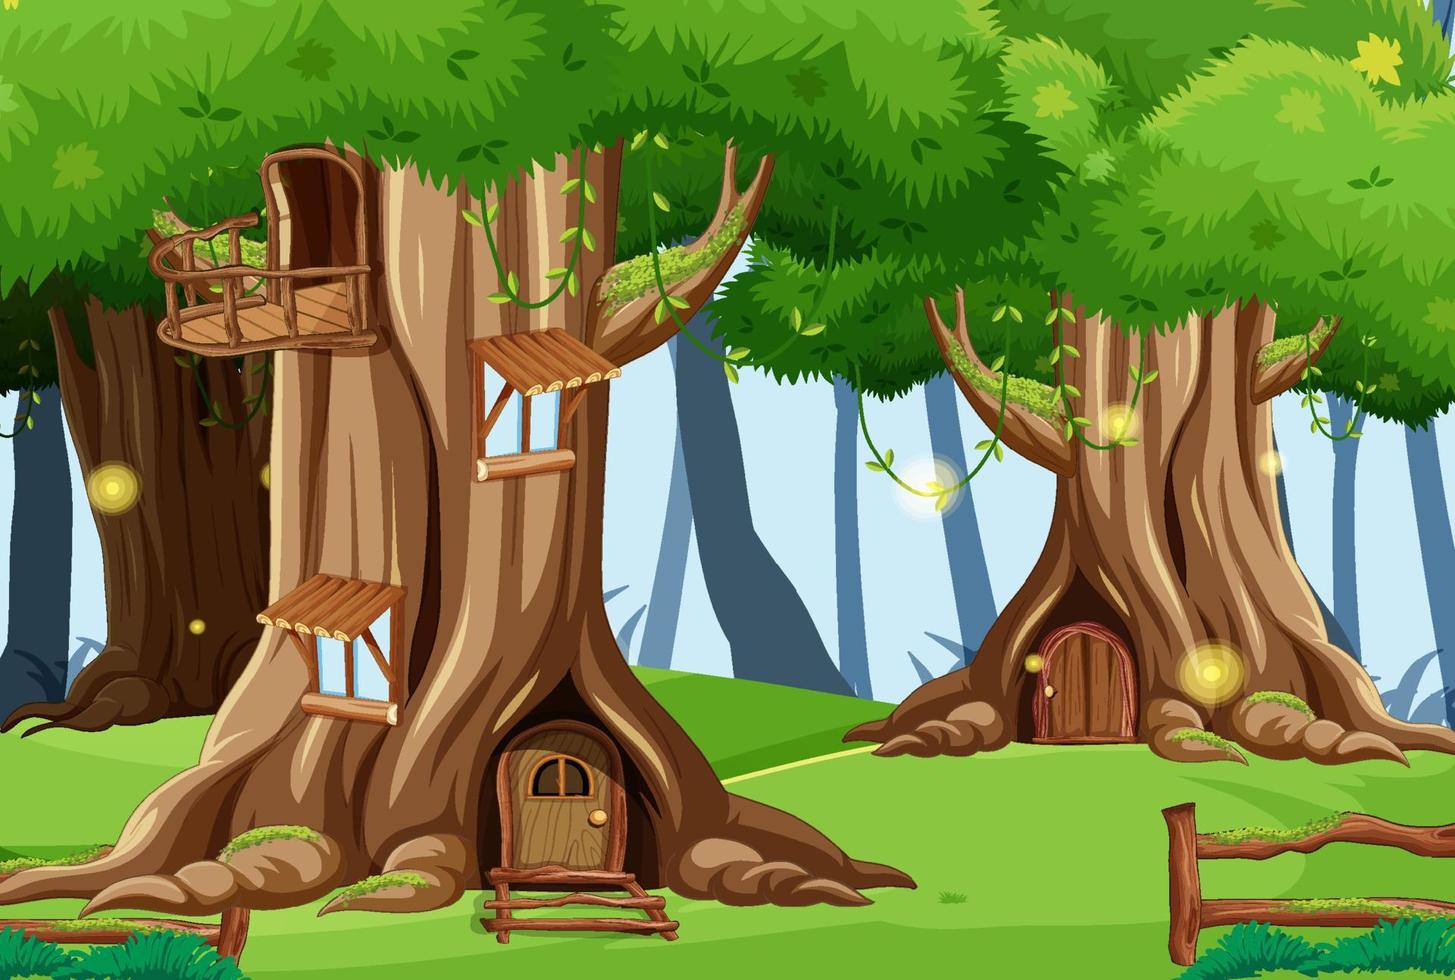 Fantasy tree house in the forest vector